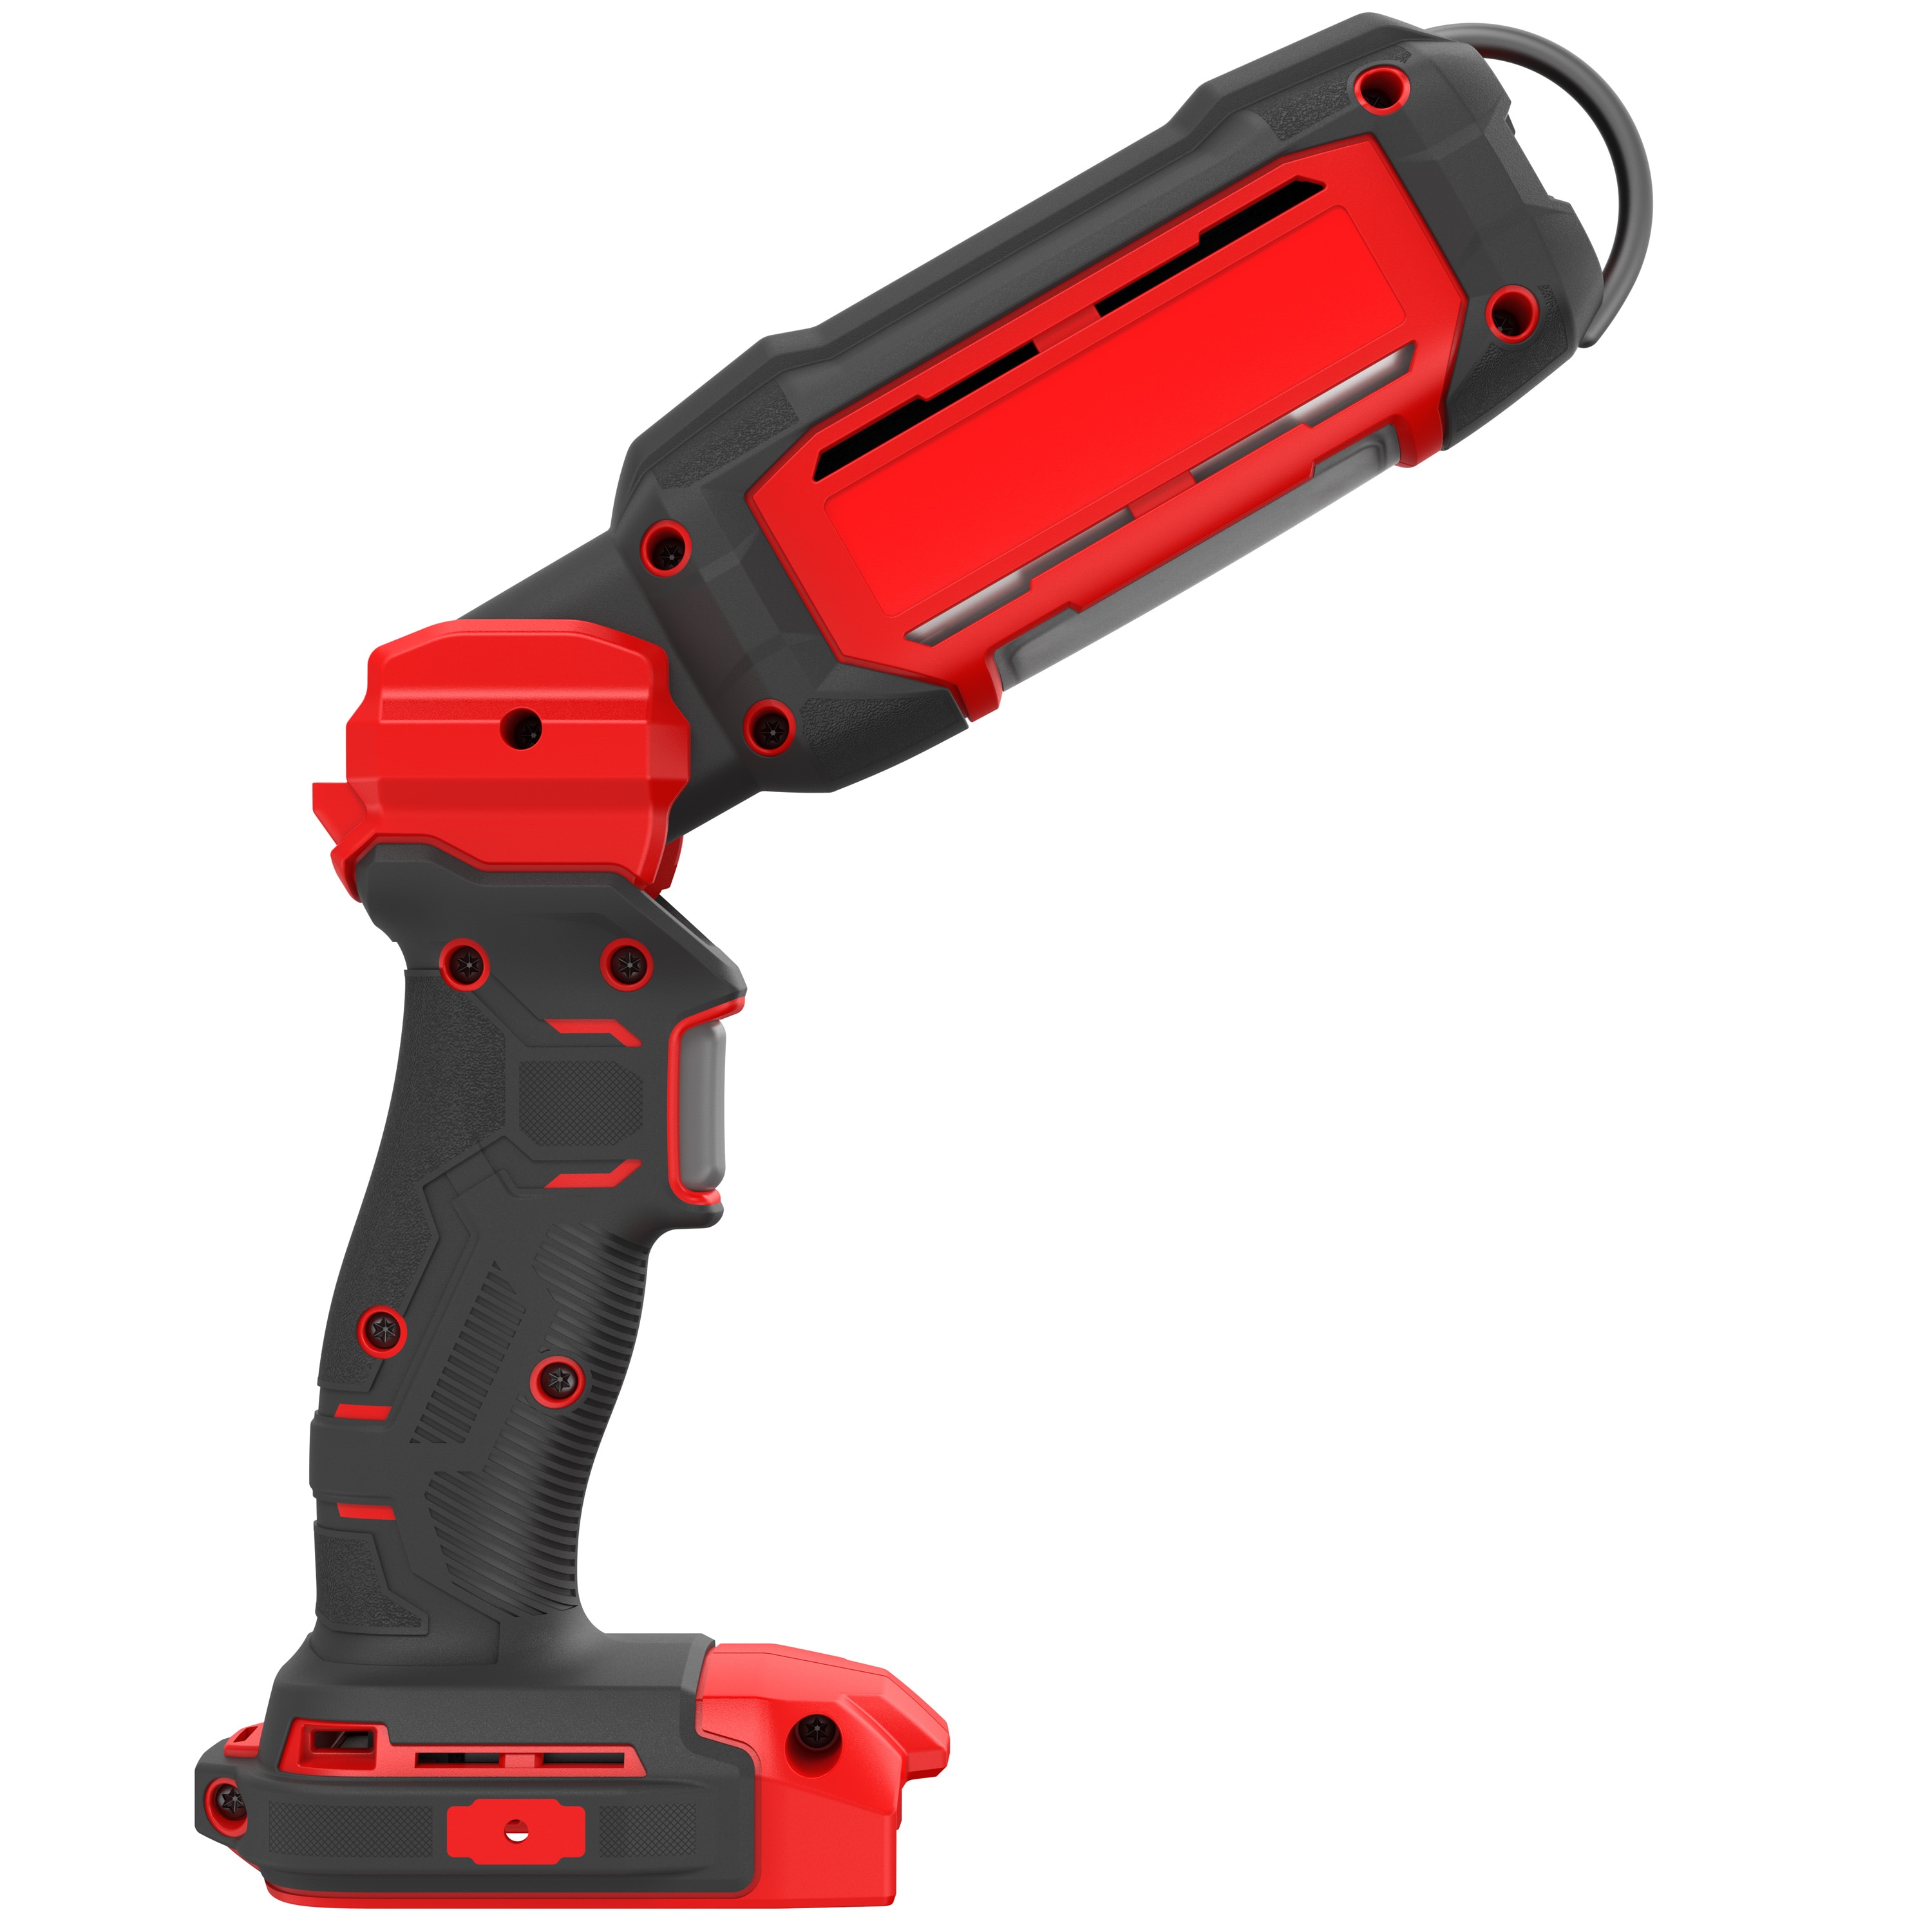 CRAFTSMAN 1500-Lumen LED Red Battery-operated Rechargeable